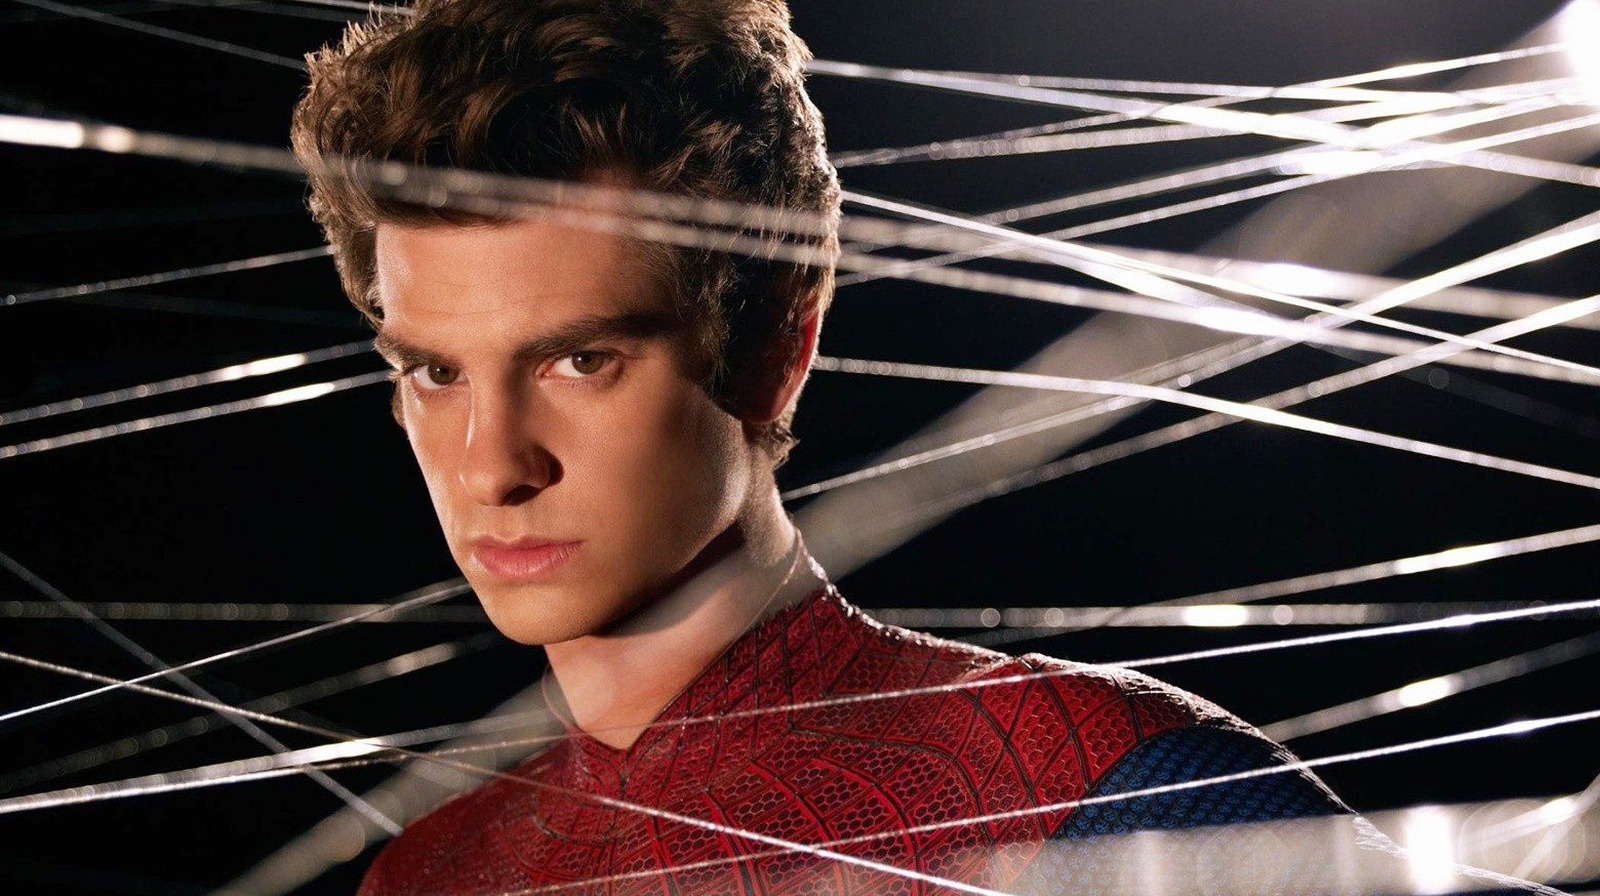 The Tragic History Of Andrew Garfield's Amazing Spider-Man, Explained